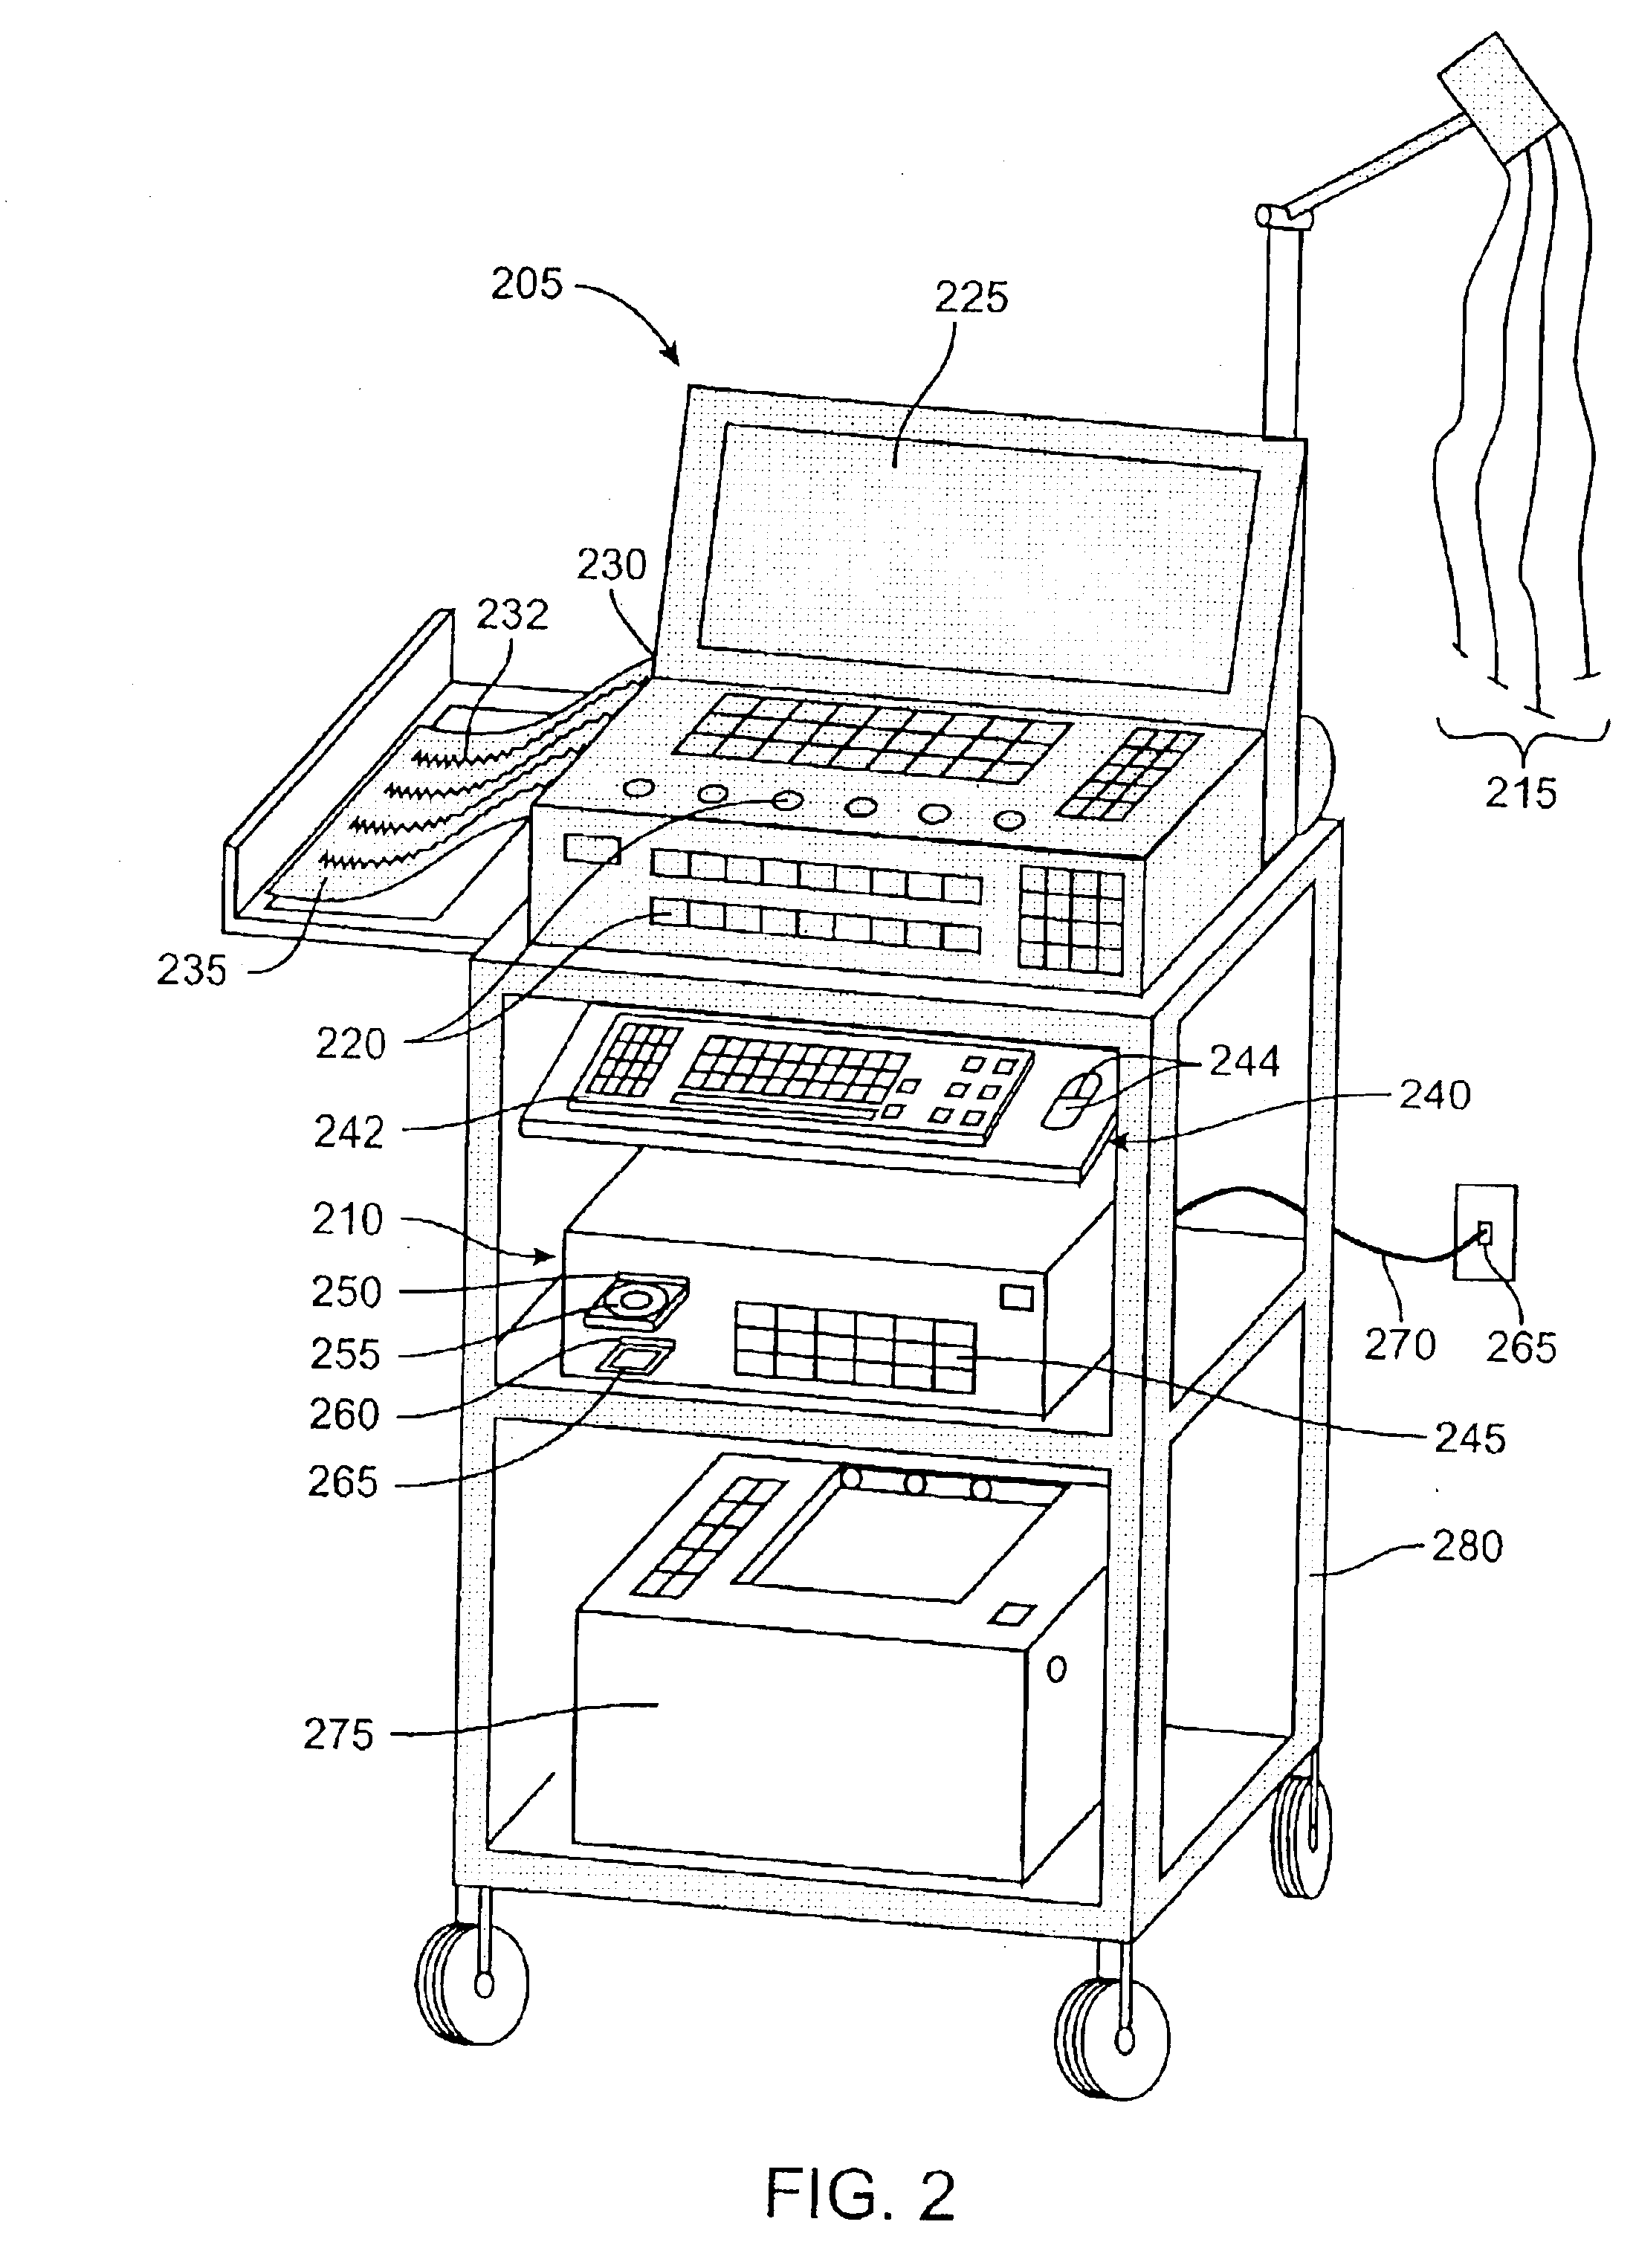 Method and apparatus for determining metabolic factors from an electrocardiogram